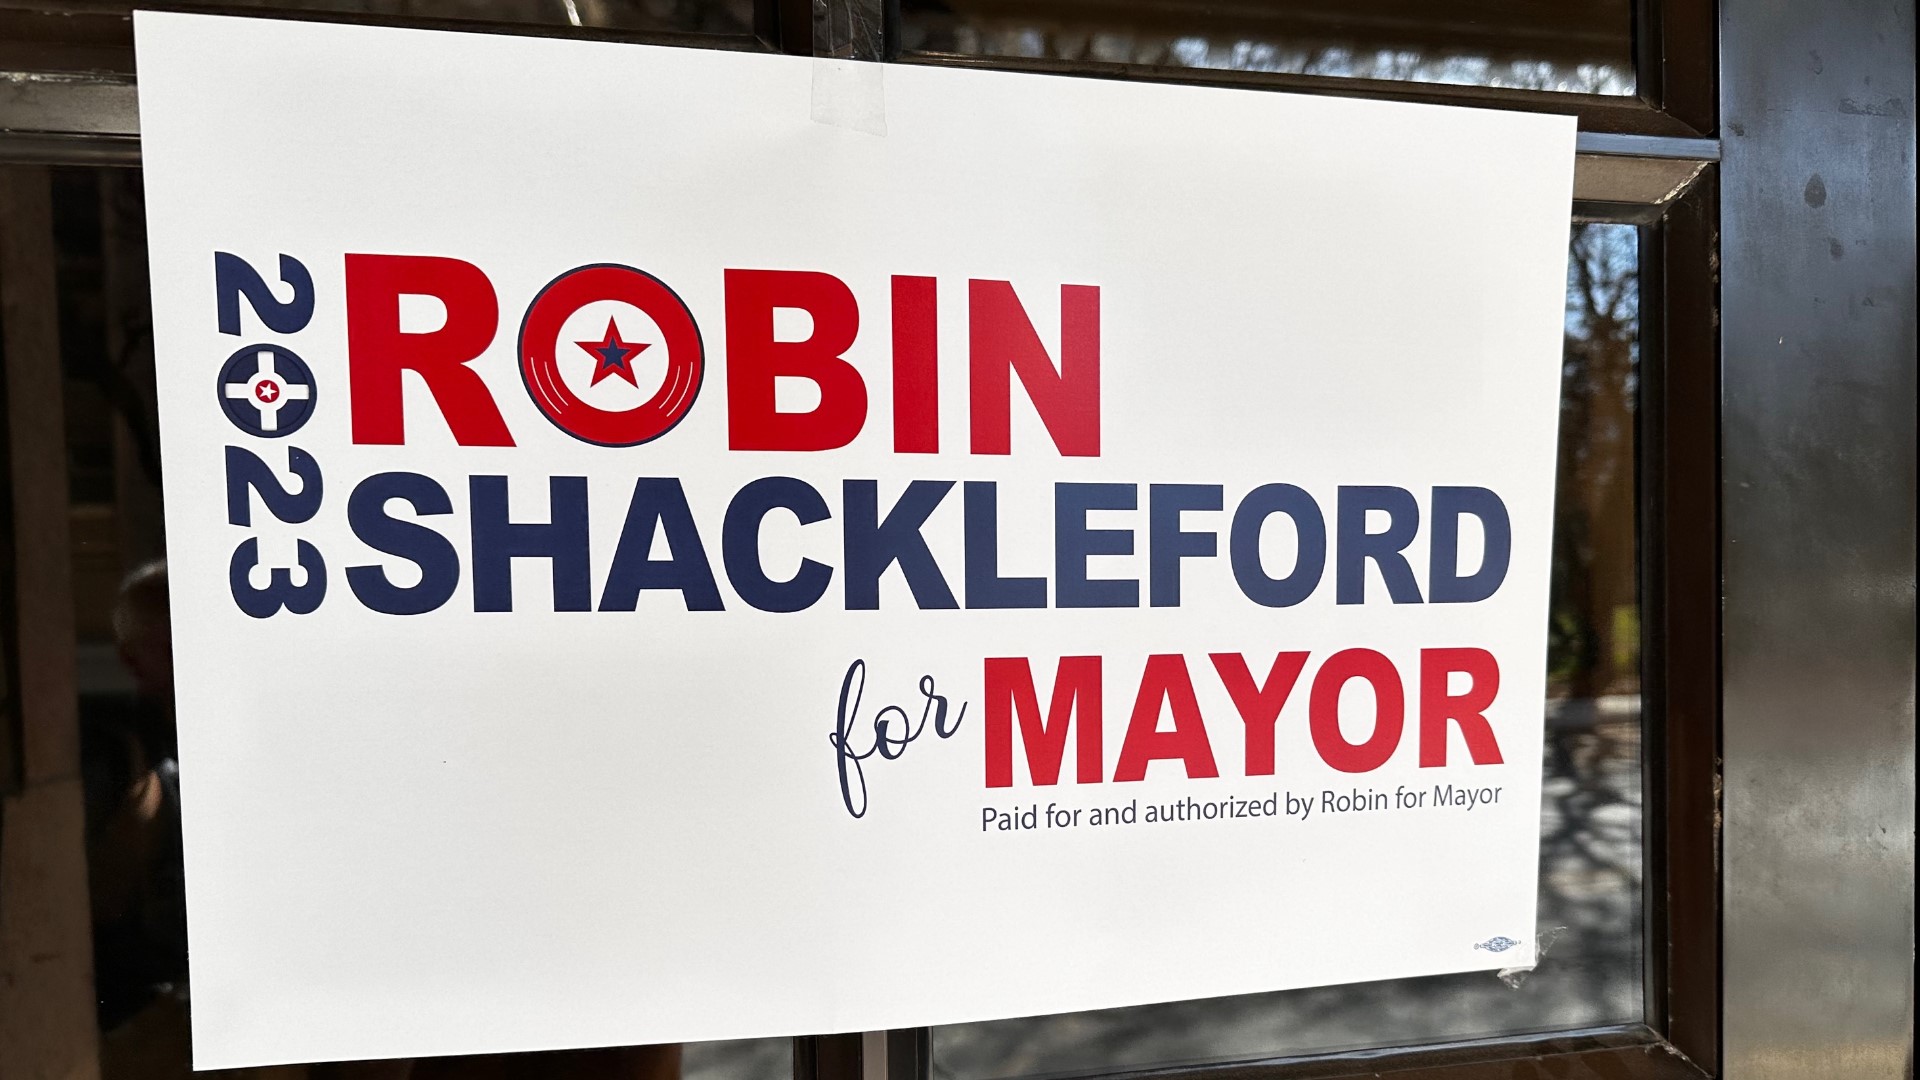 Indiana State Rep. Robin Shackleford is running for mayor of Indianapolis.